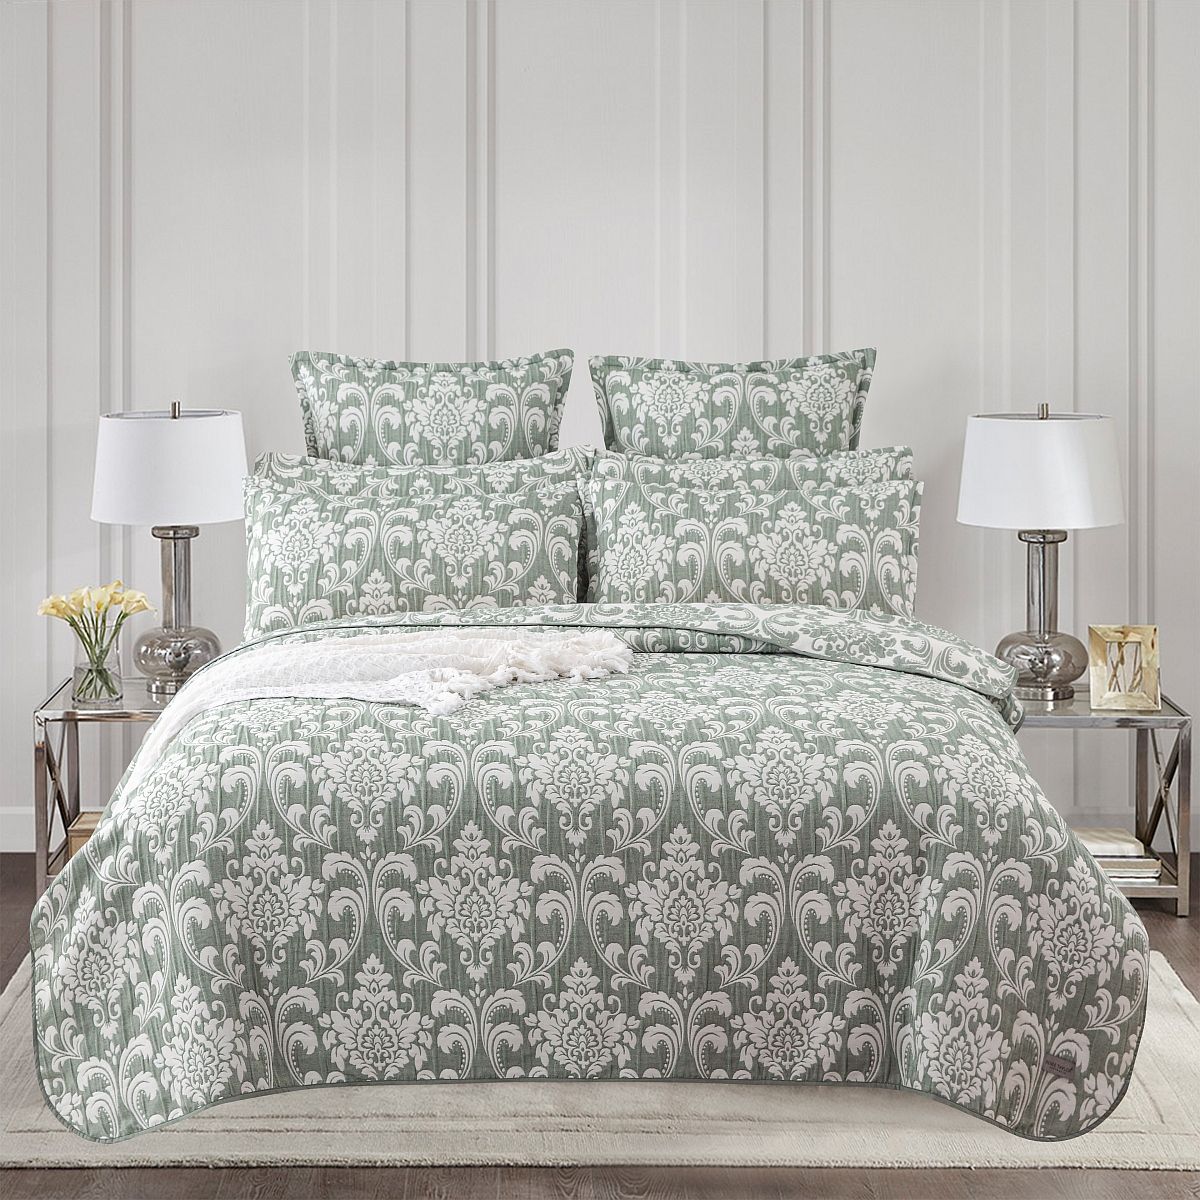 Boasting a timeless jade & white damask pattern, highlighted by sharp, straight piped edge detailing, this bedspread features a reverse side equally elegant & detailed. Whether you're looking for a light and airy summer layer or wish to layer it with a quilt for winter warmth, this bedspread provides the flexibility to effortlessly shift between seasons. 